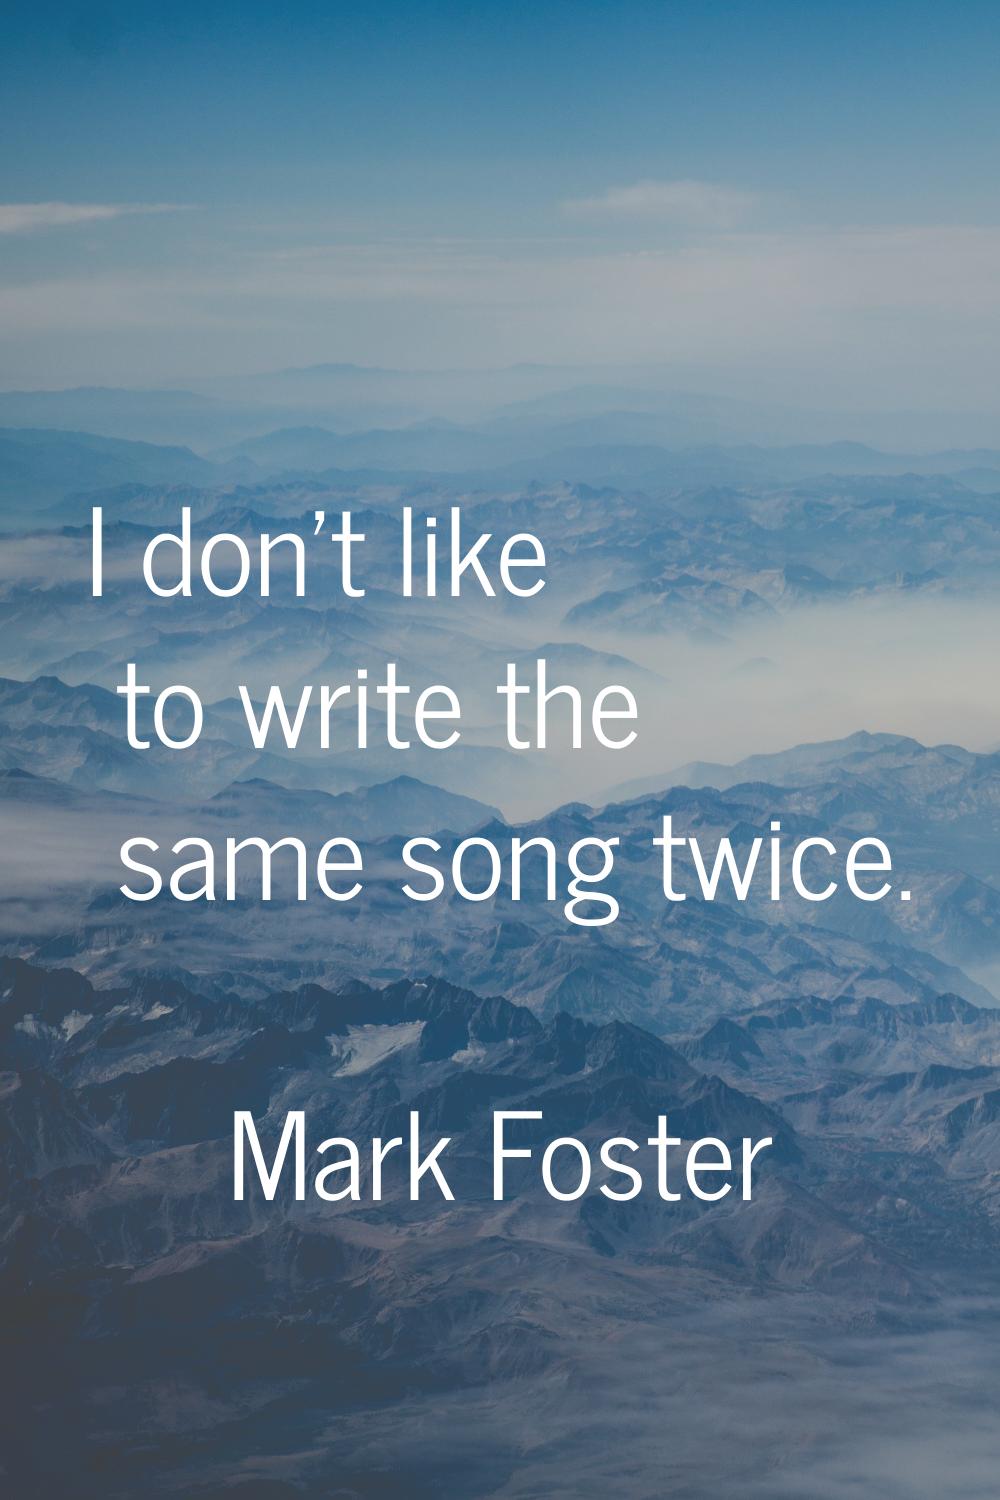 I don't like to write the same song twice.